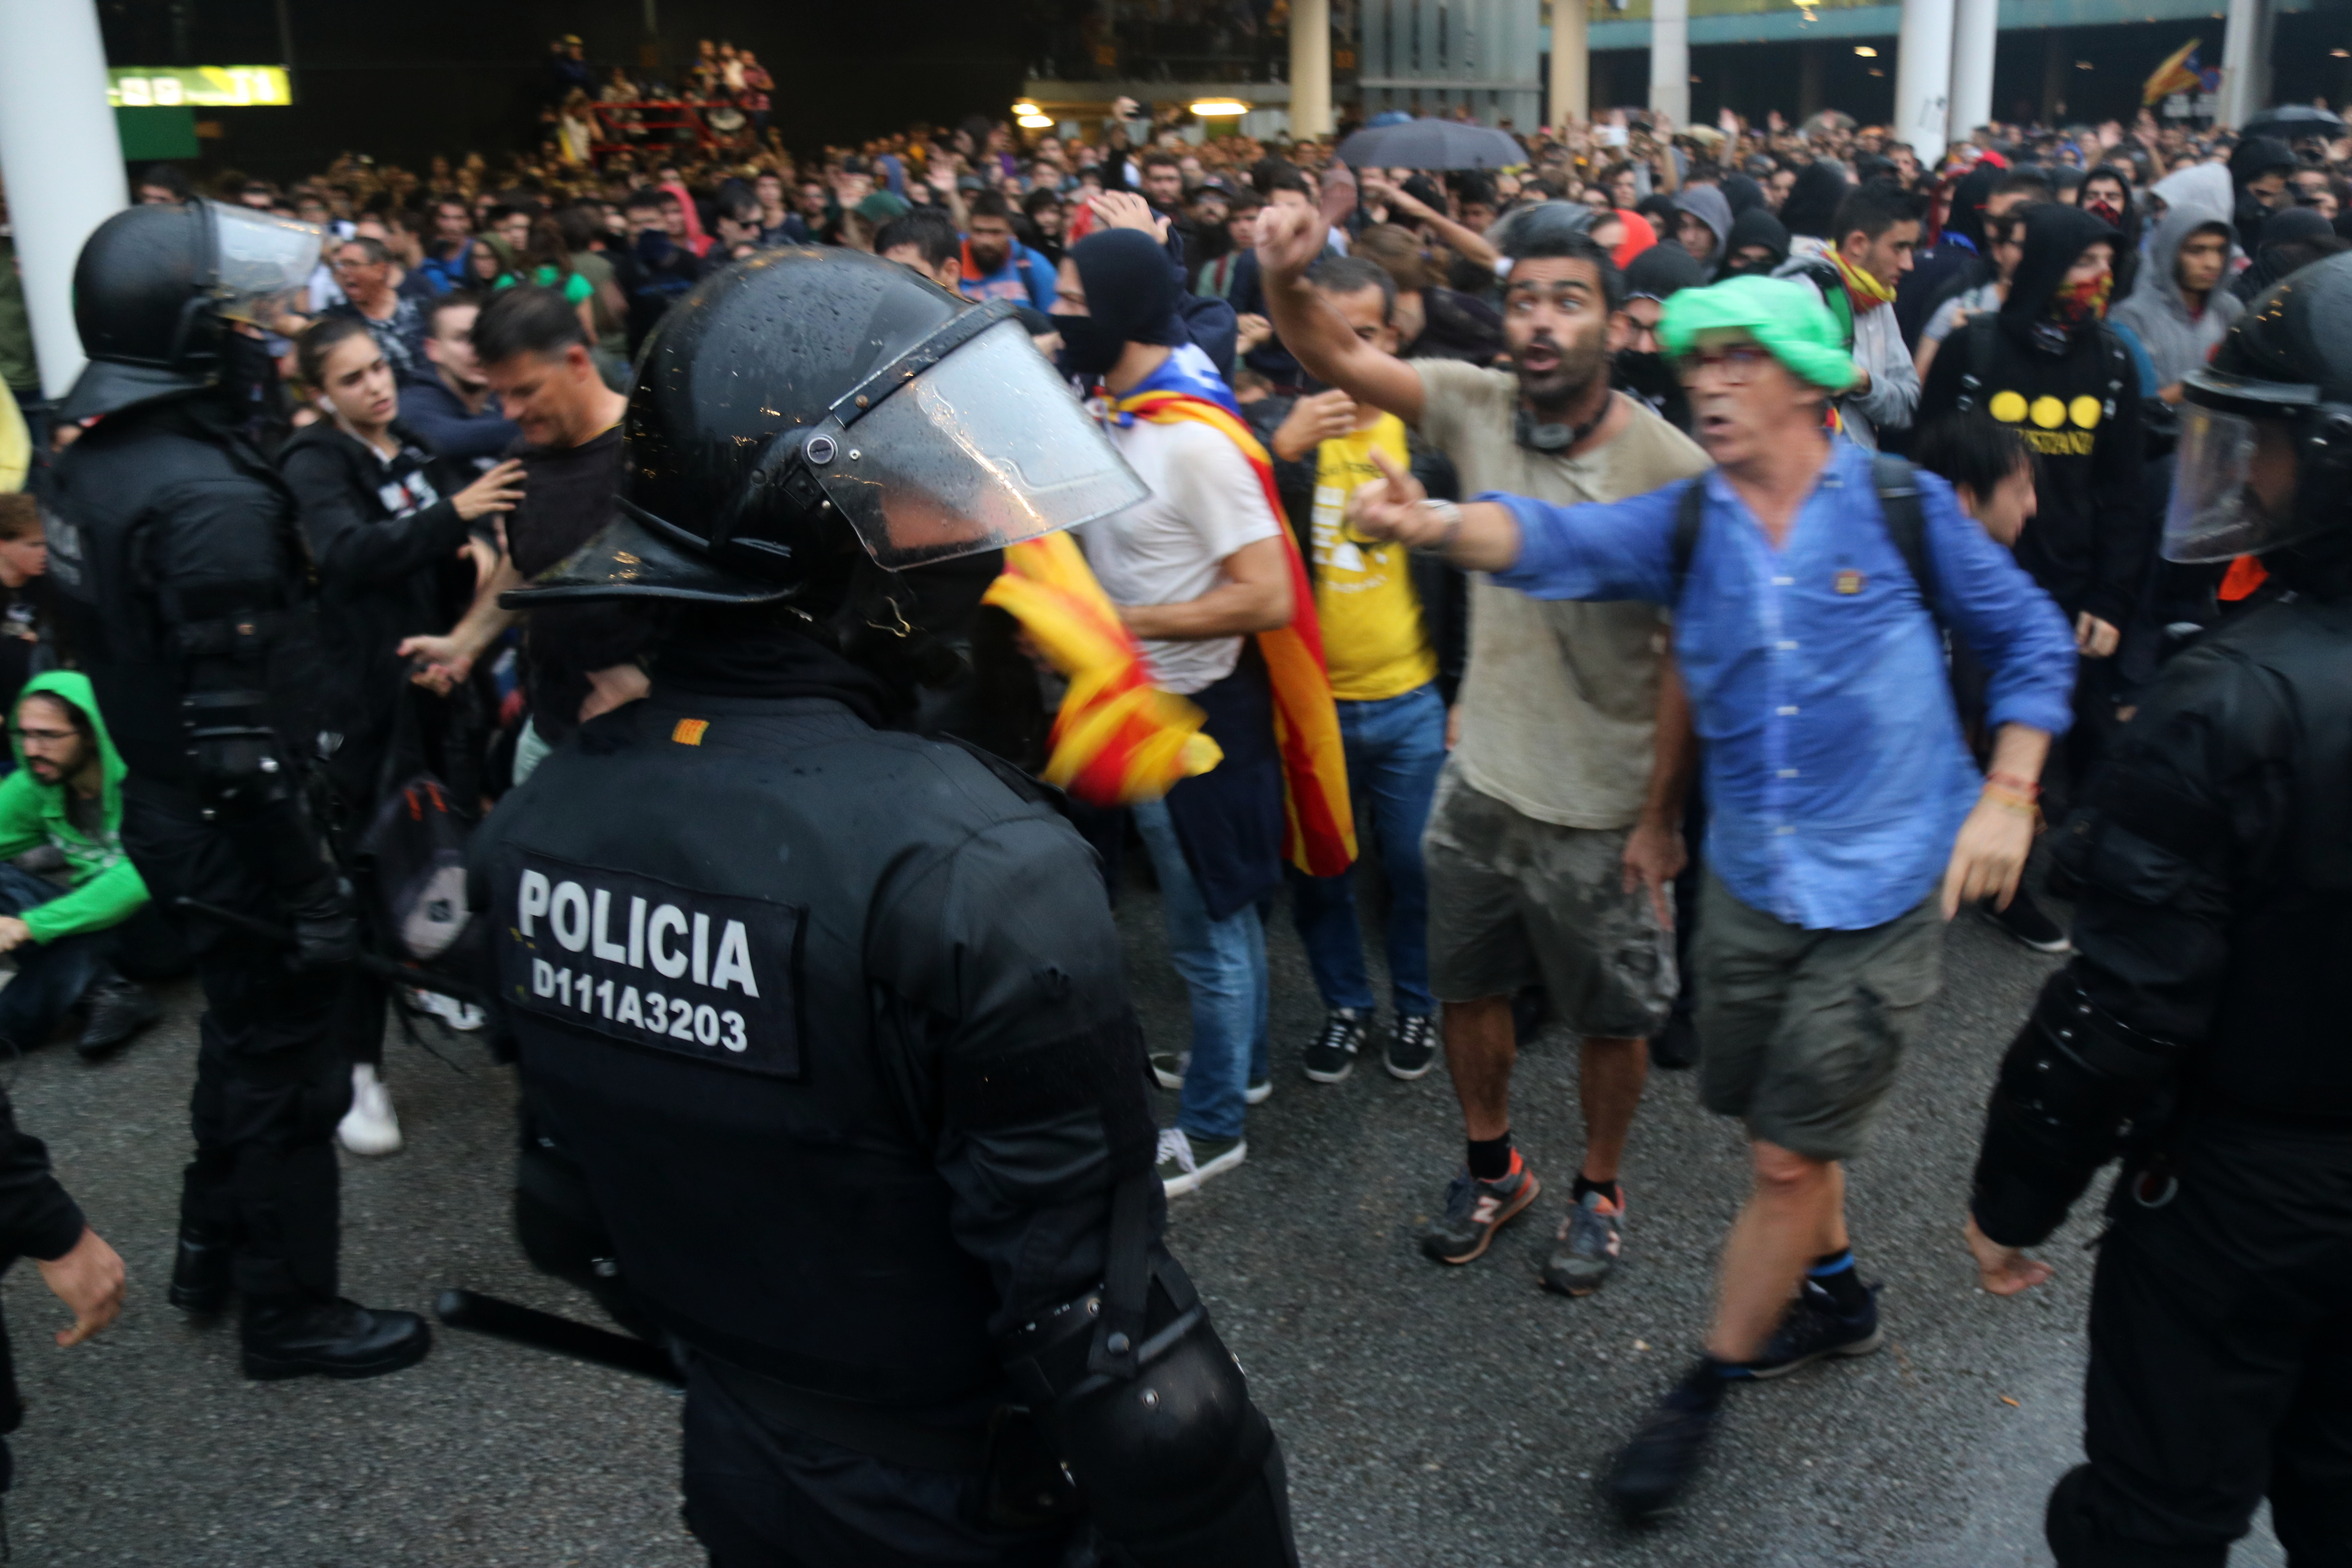 Tsunami Democràtic protesters clash with police at the airport protest in October 2019